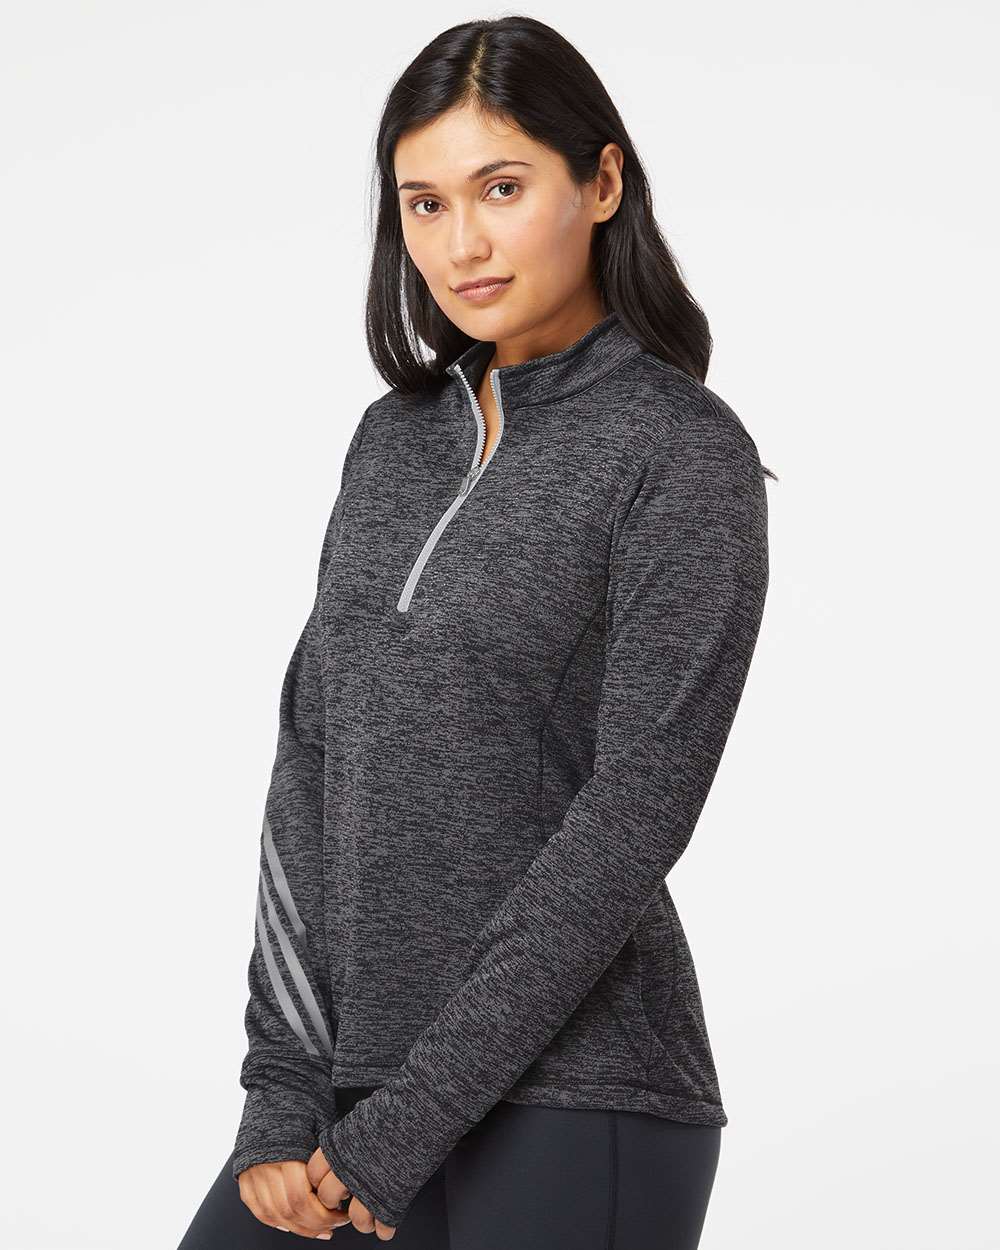 Adidas A285 - Women's Brushed Terry Heathered Quarter-Zip Pullover